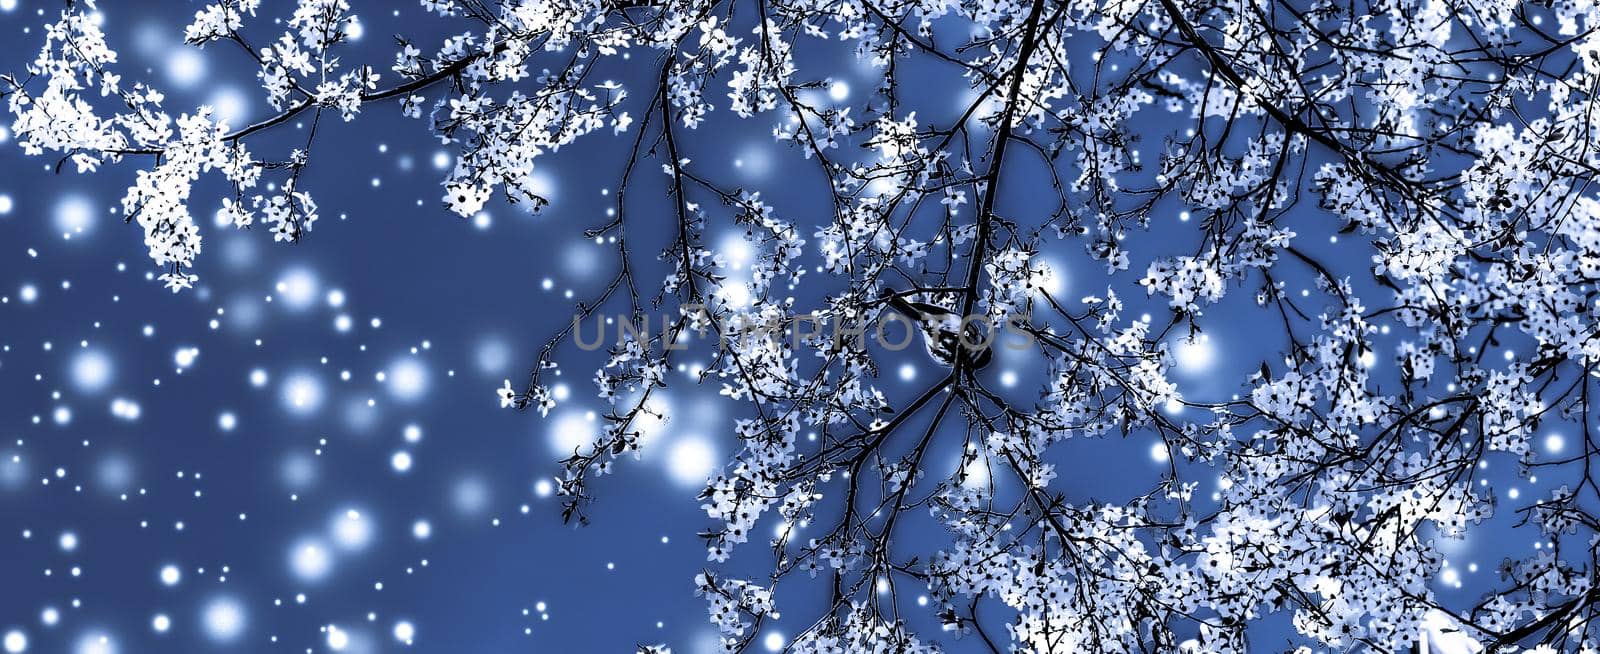 Christmas, New Years blue floral background, holiday card design, flower tree and snow glitter as winter season sale promotion backdrop for luxury beauty brand by Anneleven